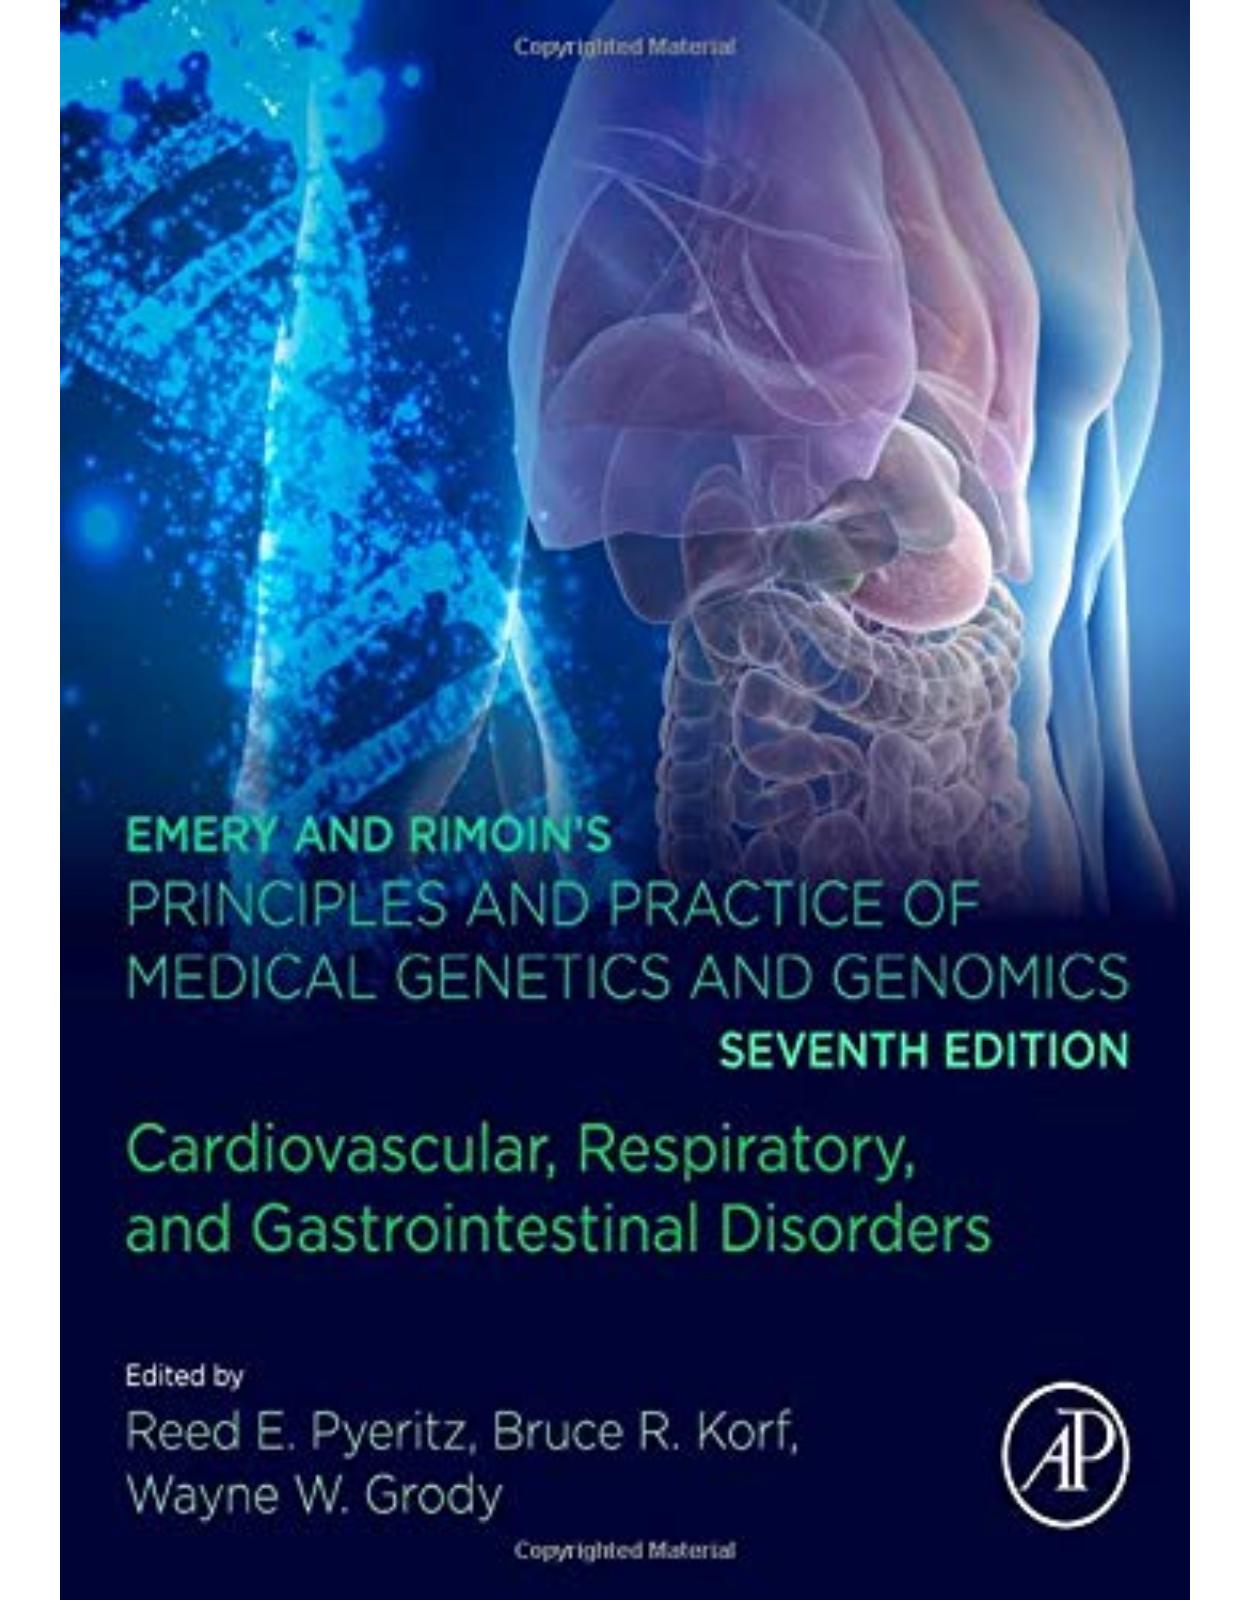 Emery and Rimoin’s Principles and Practice of Medical Genetics and Genomics, 7th Edition 